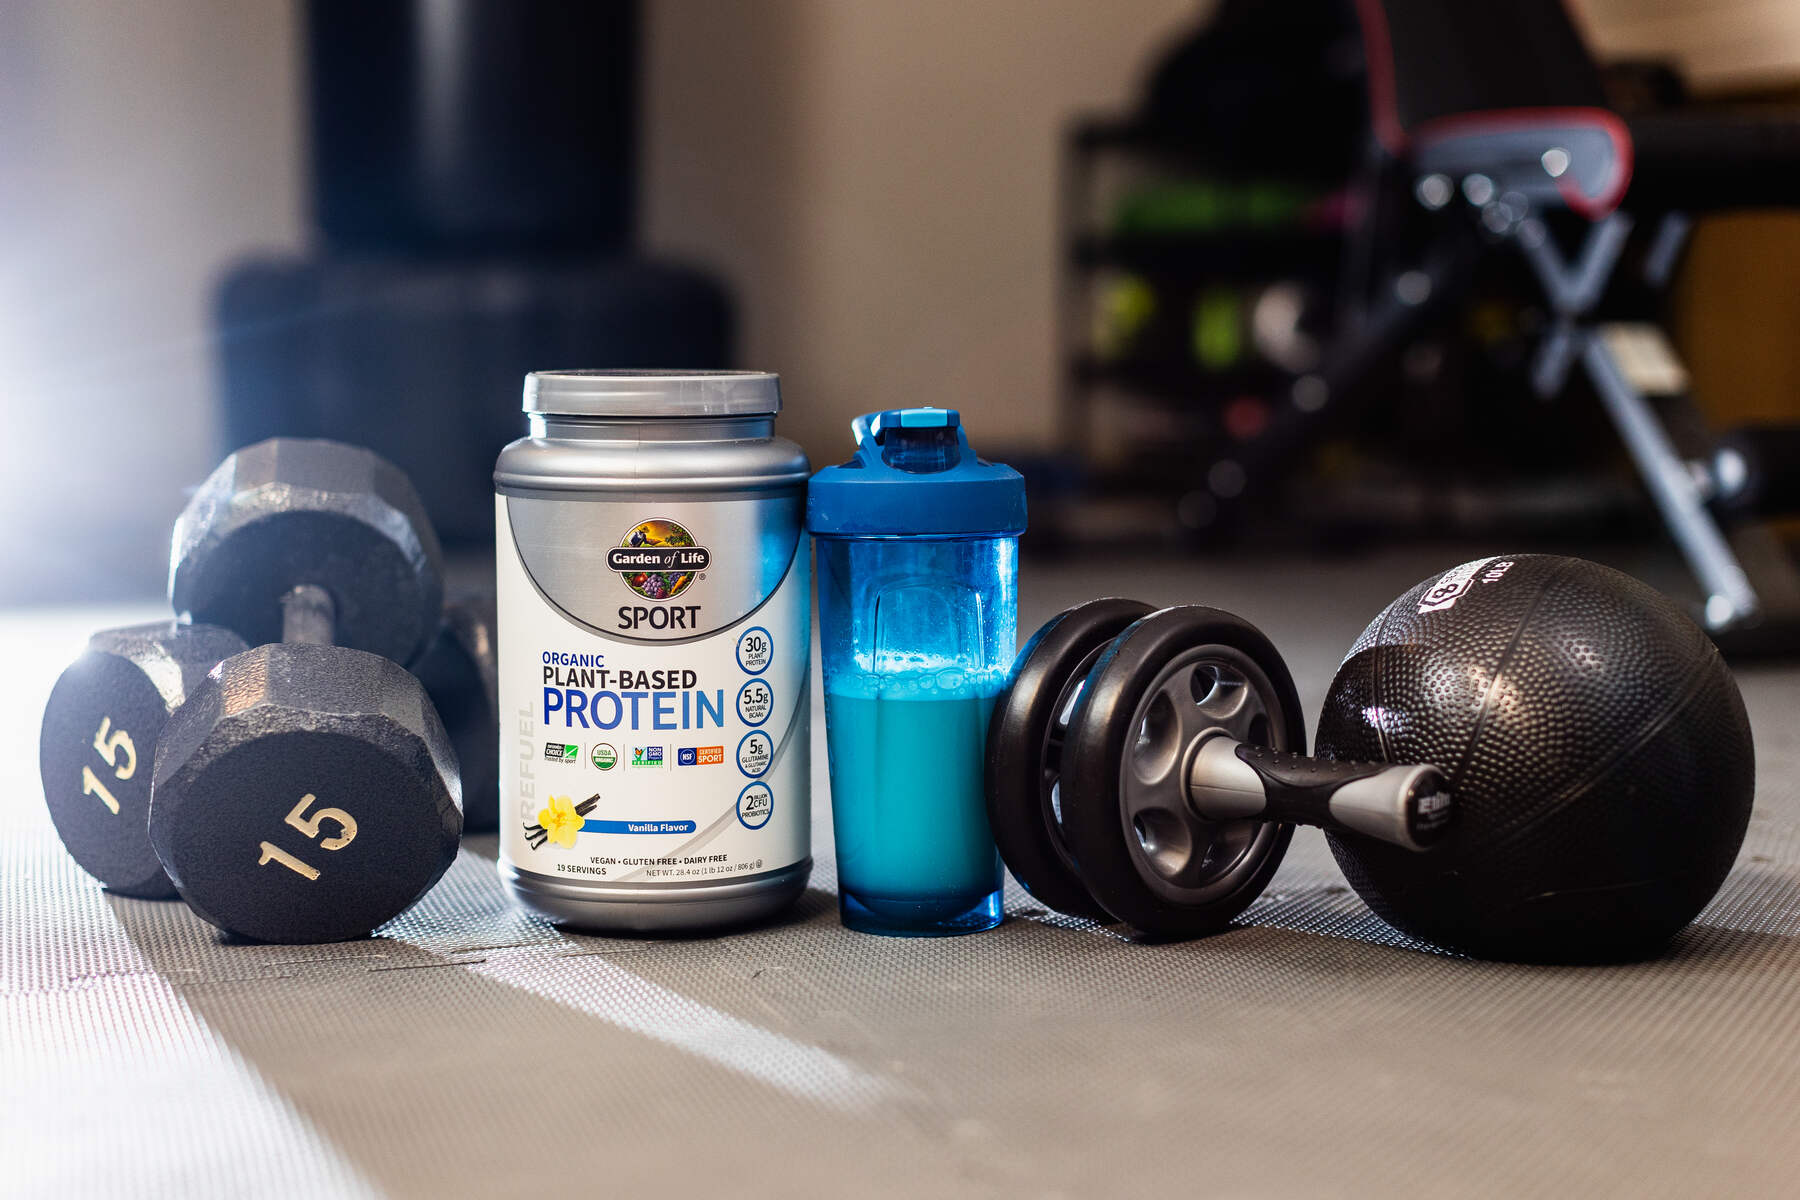 A workout area with a silver container of Garden of Life Sport Organic Plant-Based Protein, a blue protein shaker, dumbbells, and a black exercise ball